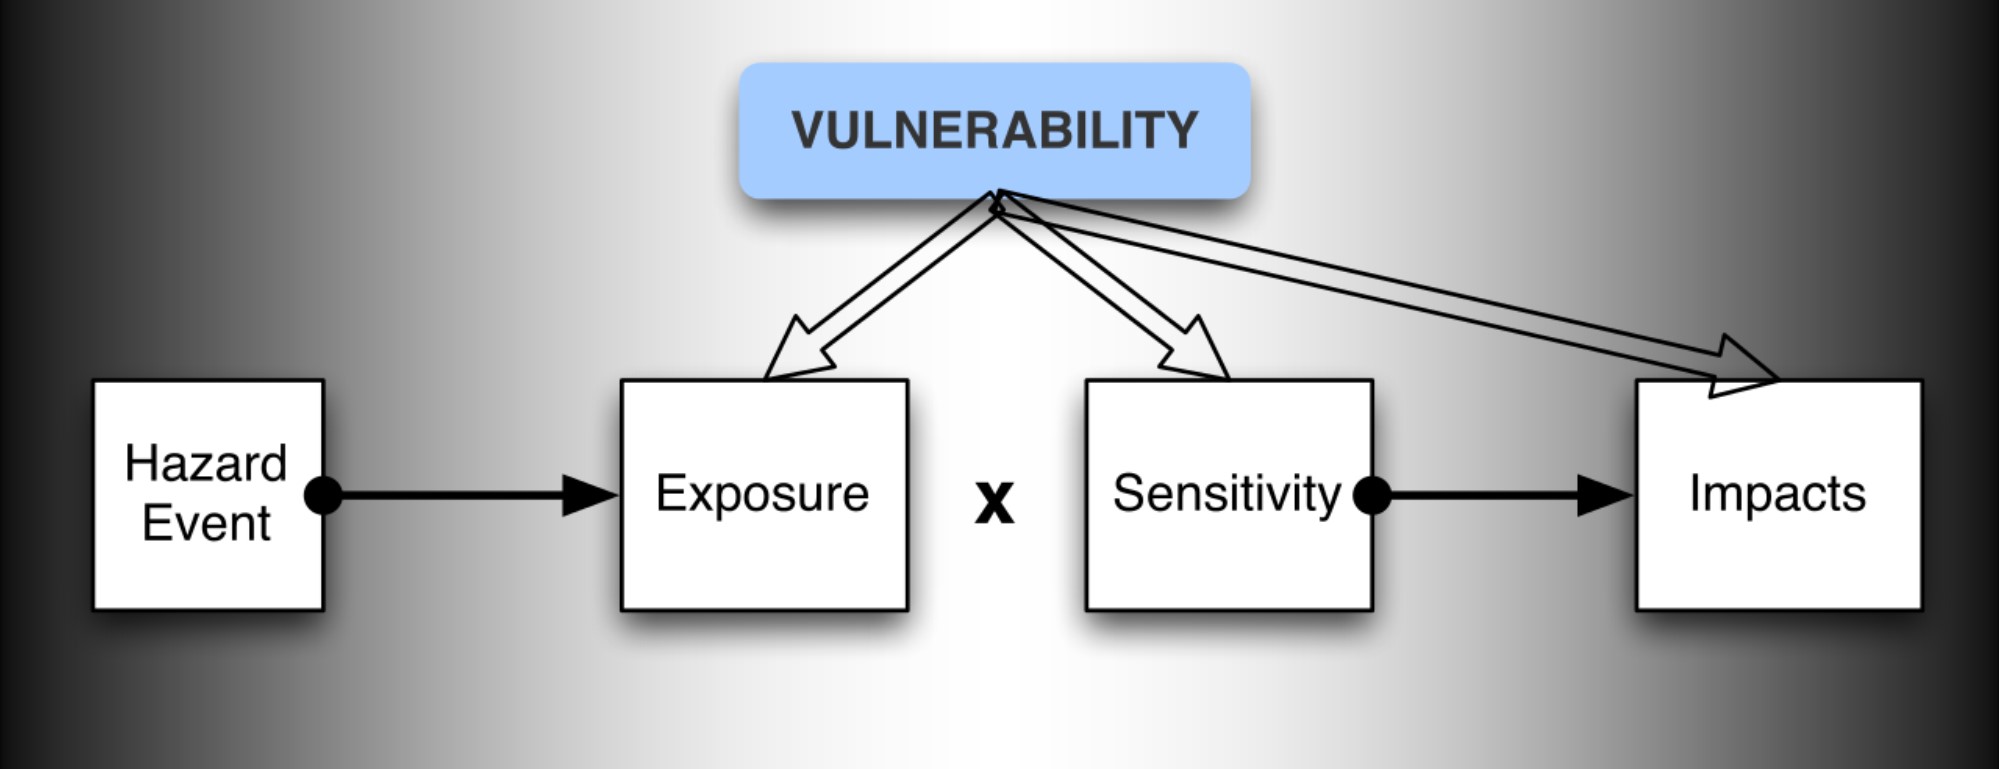 What is vulnerability in disaster management?